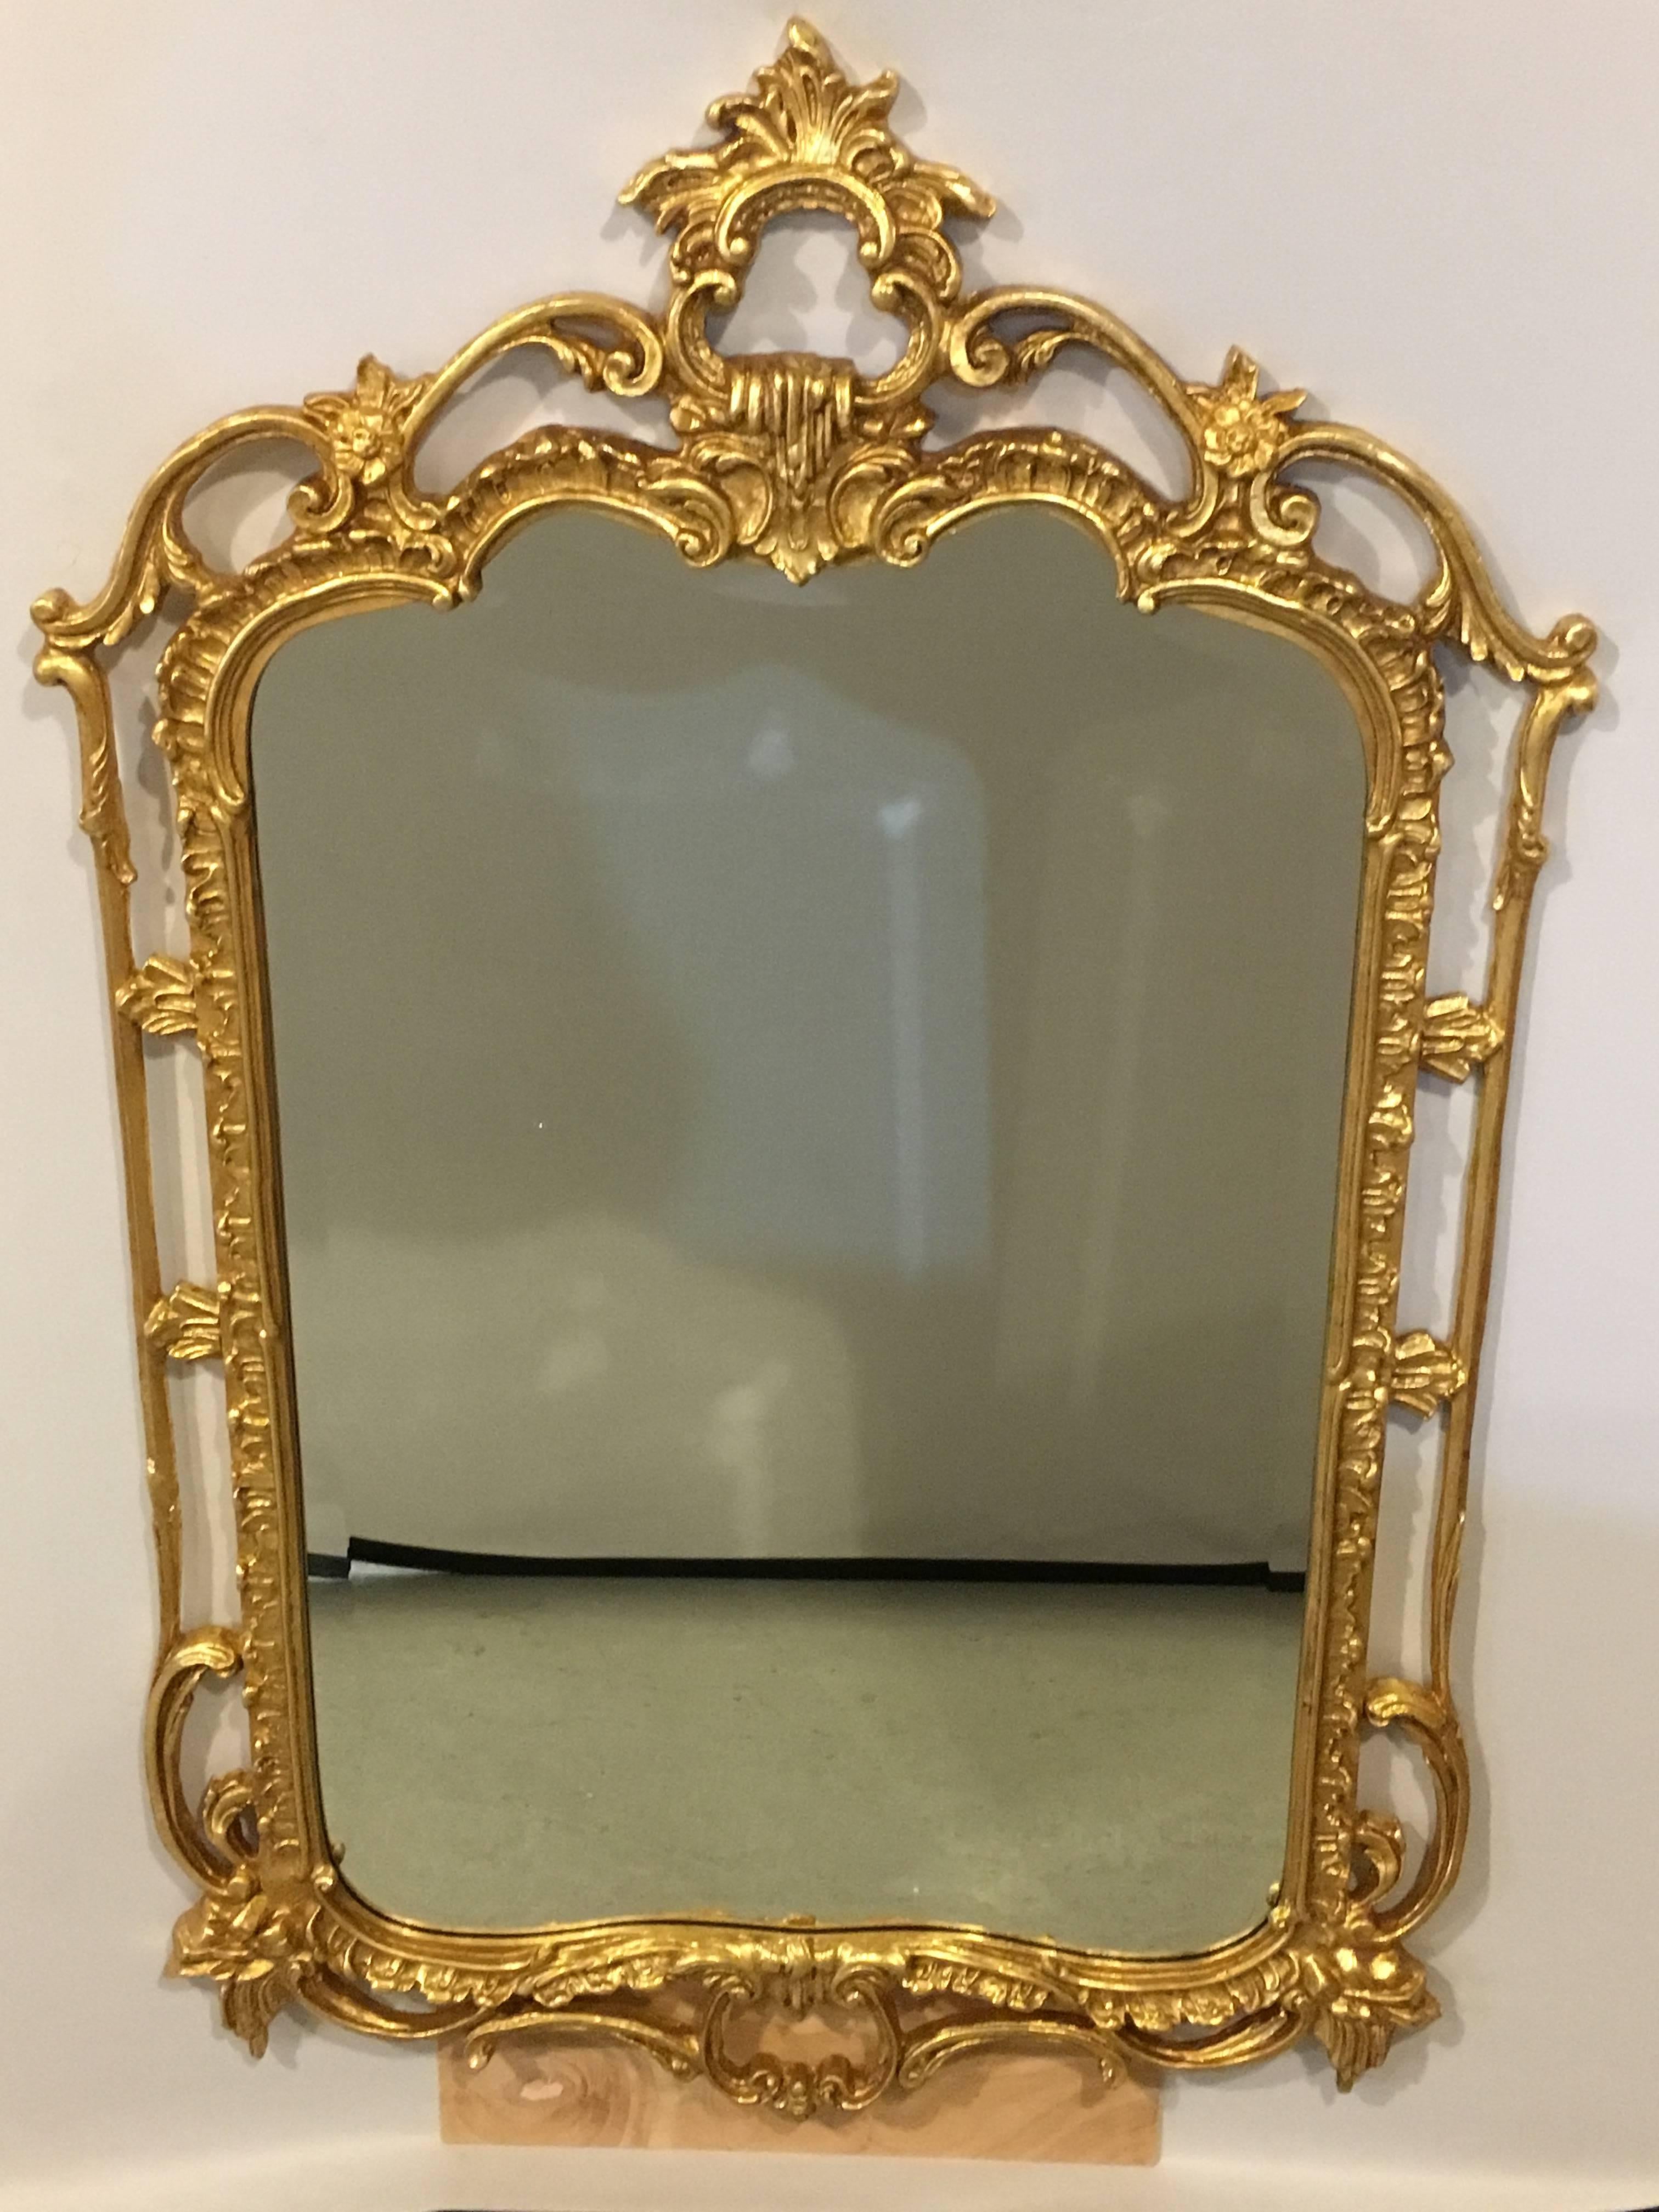 A pair of giltwood pierced carved wall console mirrors. A pair of custom quality giltwood mirrors. Each having a beveled center mirror panel framed in a Chippendale style carved frame. Custom-made by Friedman Bros.